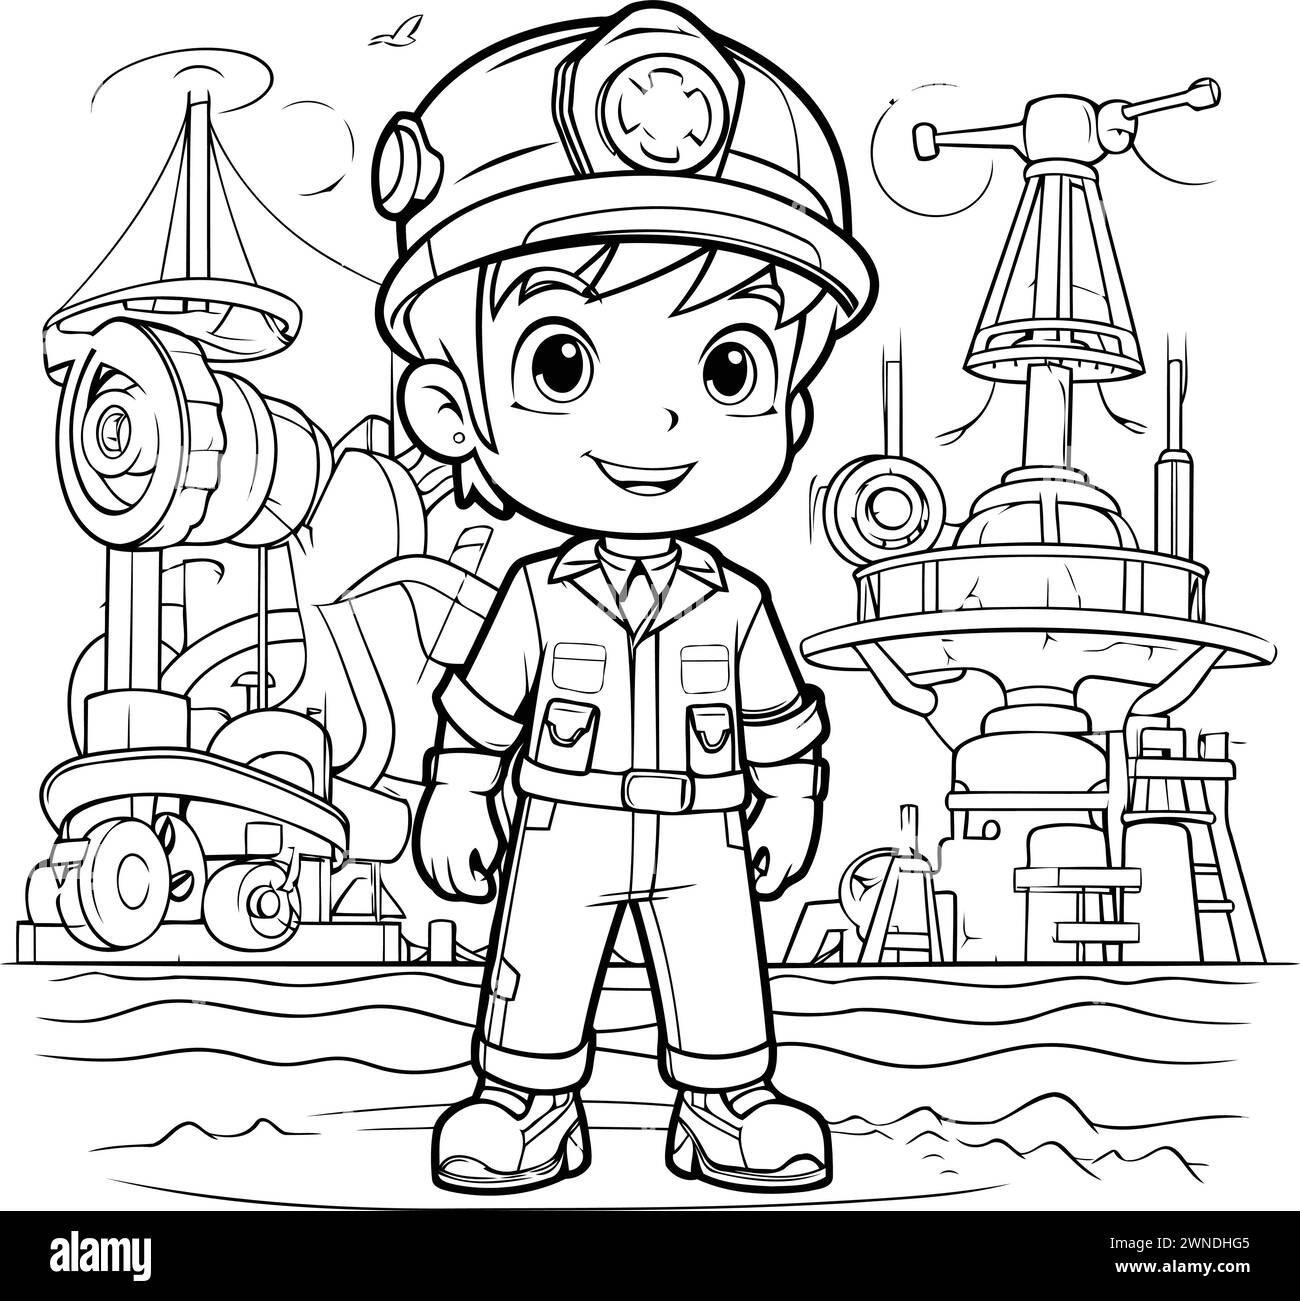 Coloring Page Outline Of cartoon firefighter on construction site. Vector illustration. Stock Vector